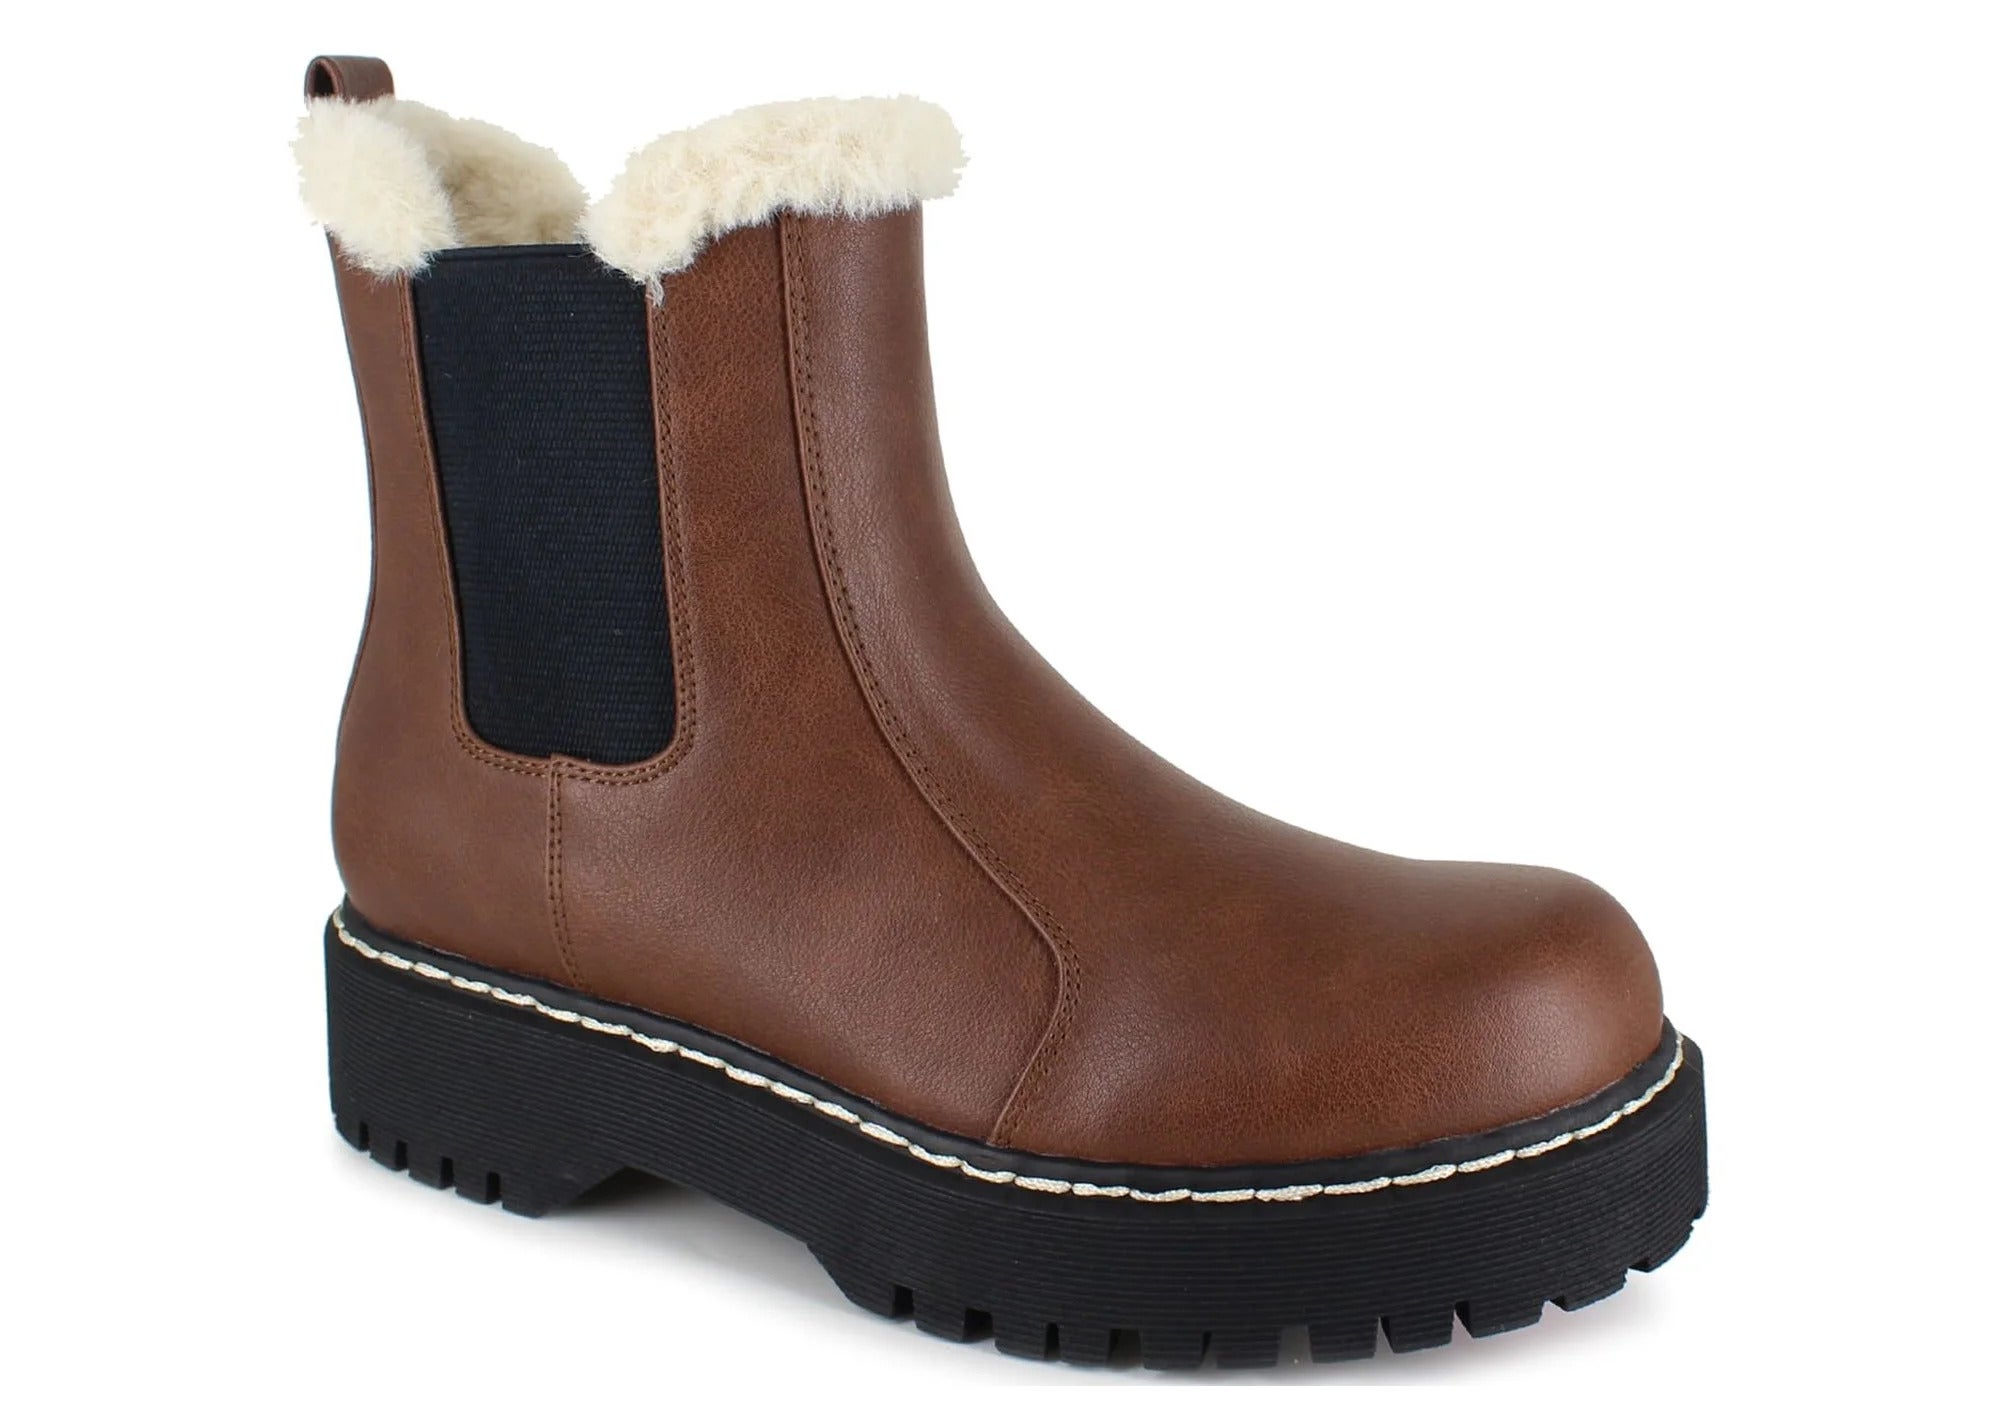 The boot in brown with cream fur trim and contrast stitching